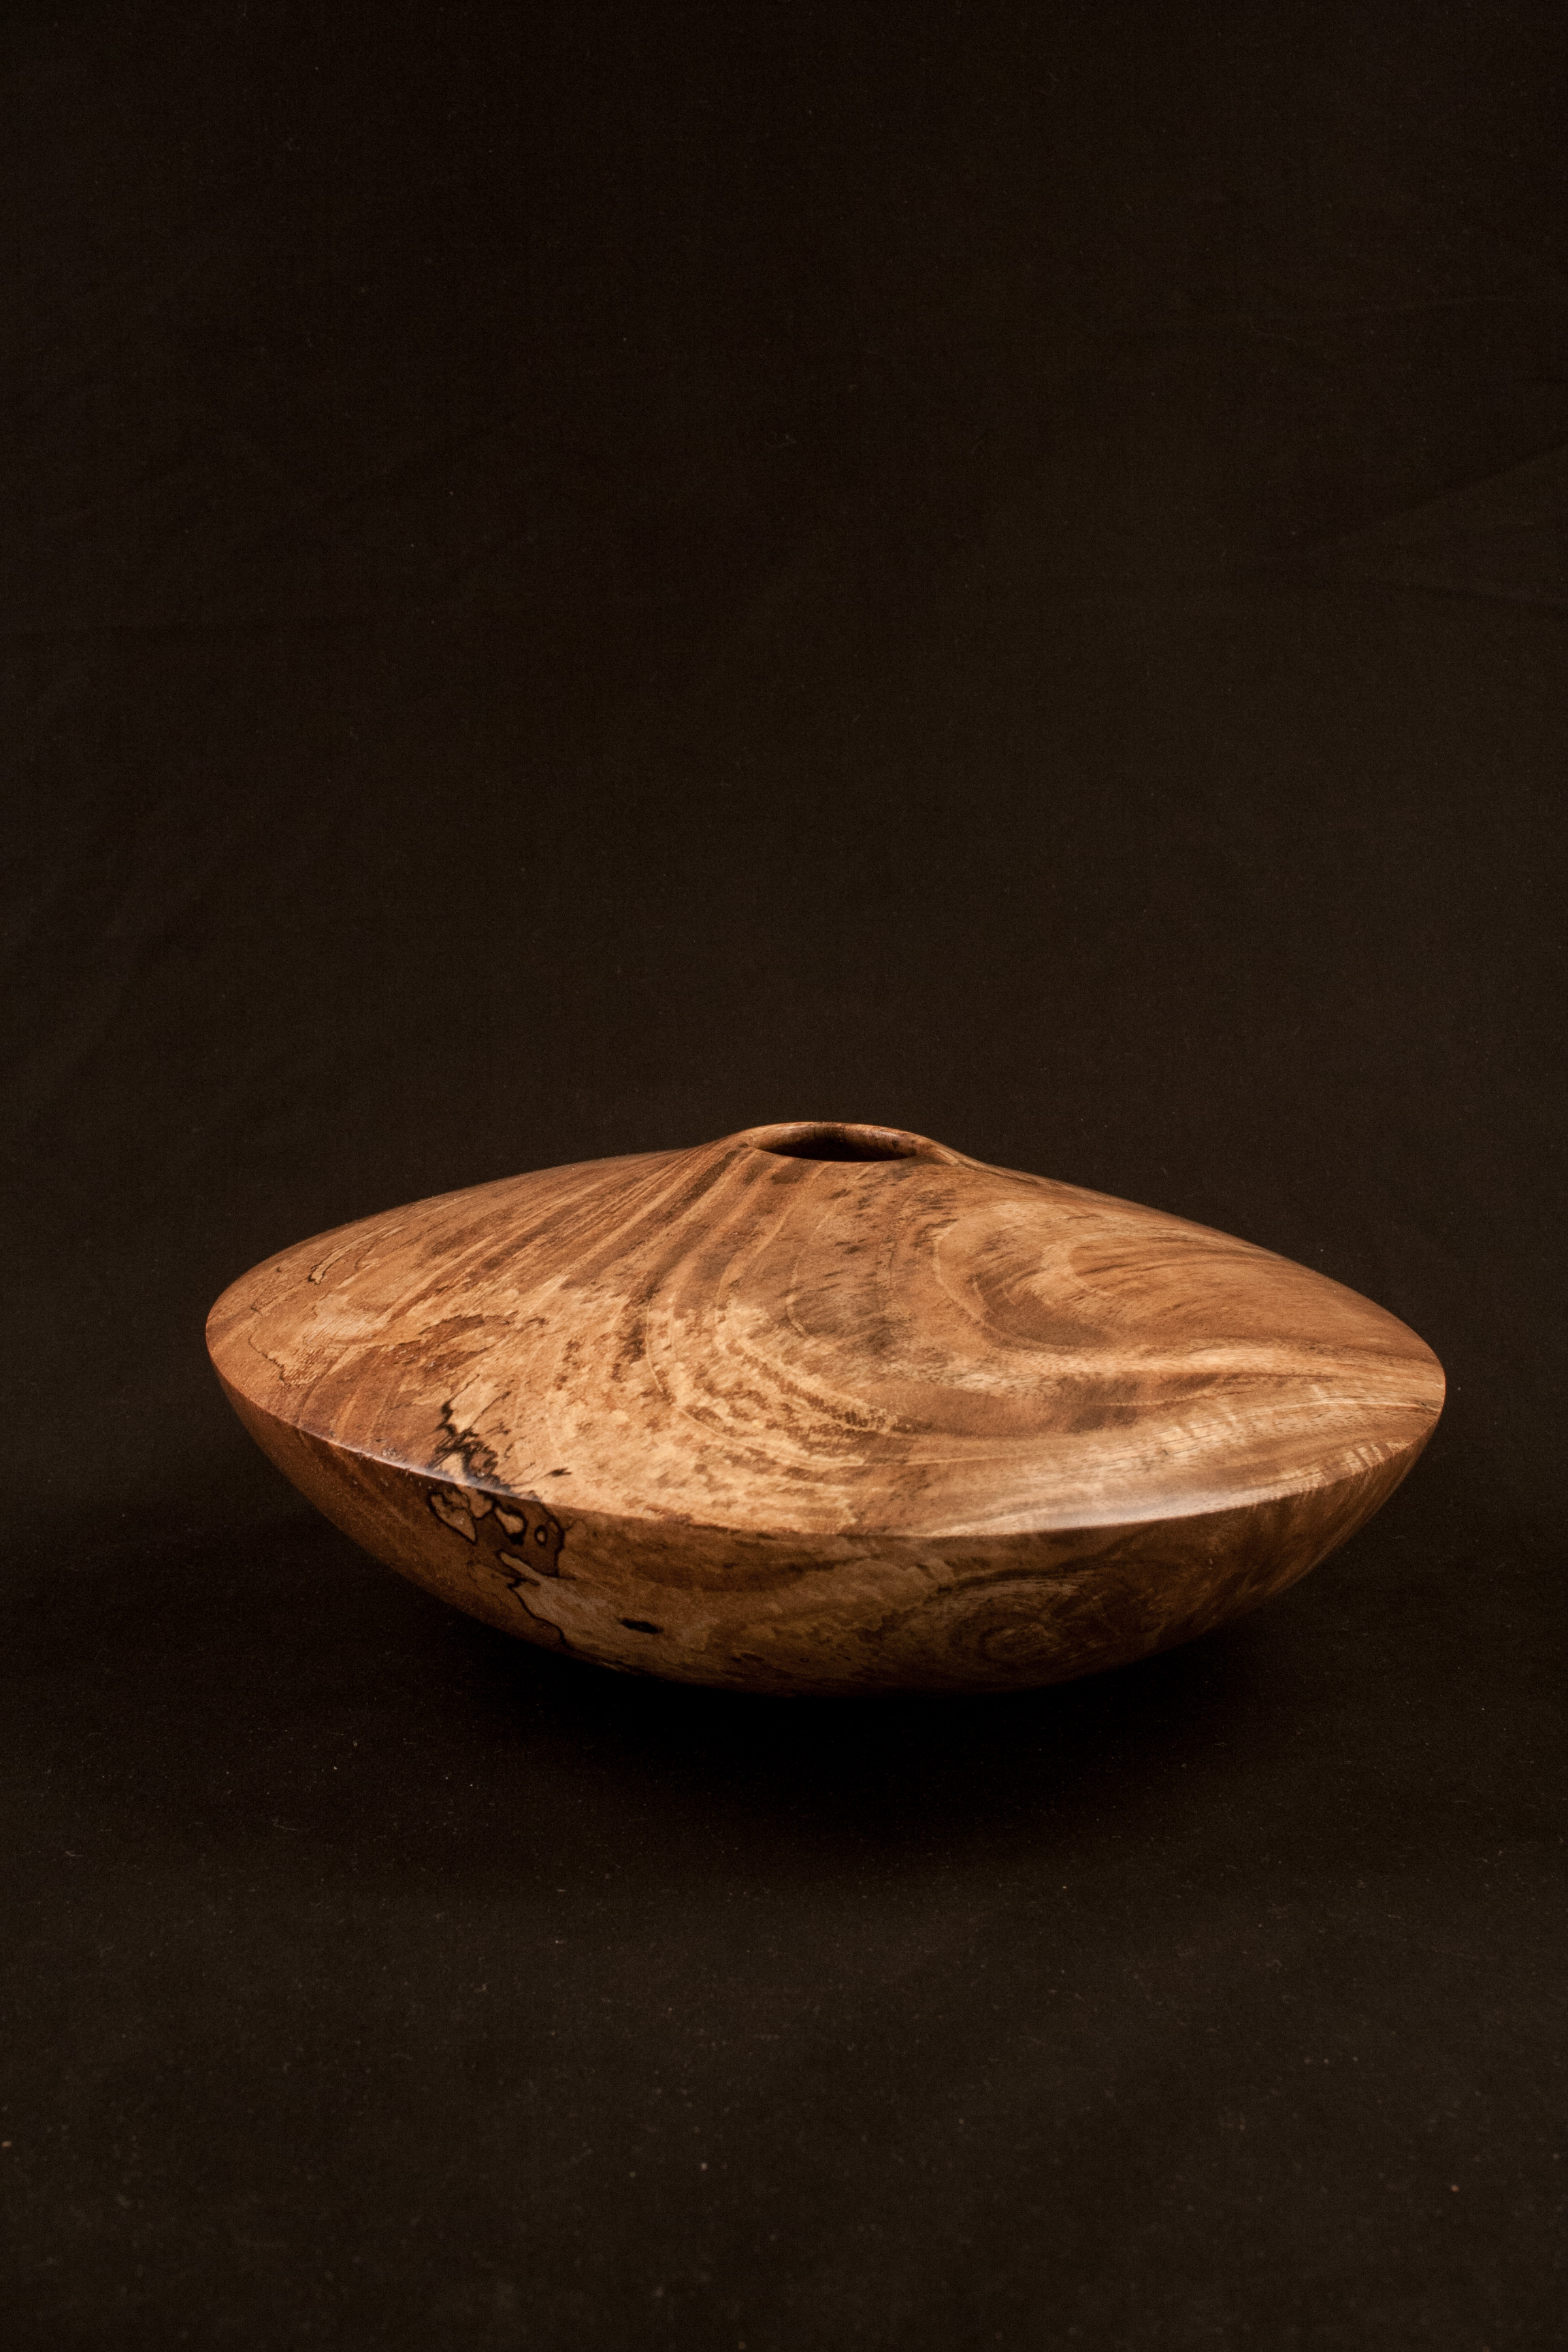 197 Mango Hollow form 11 x 4.5......$485......Currently on display at "Art and Gardener Gallery" in Jacksonville Oregon